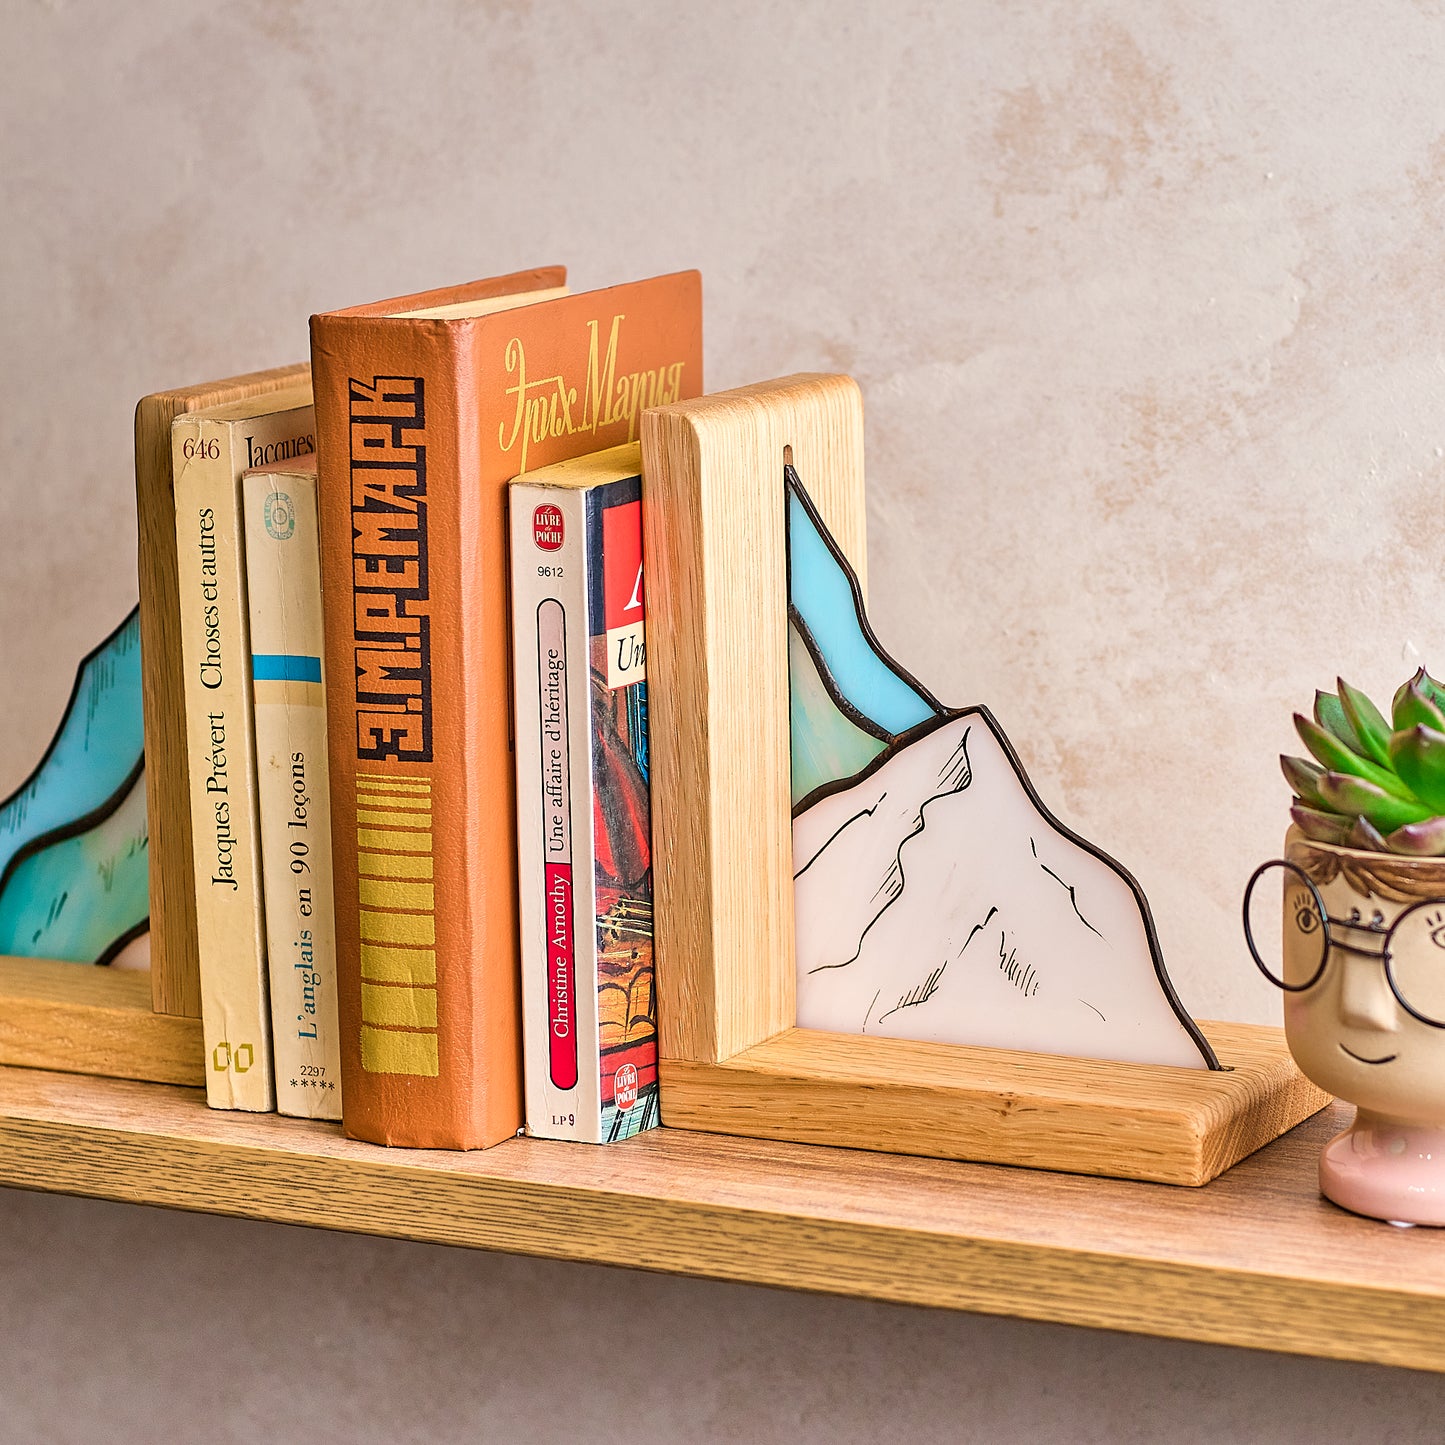 Mountains Stained Glass Bookends